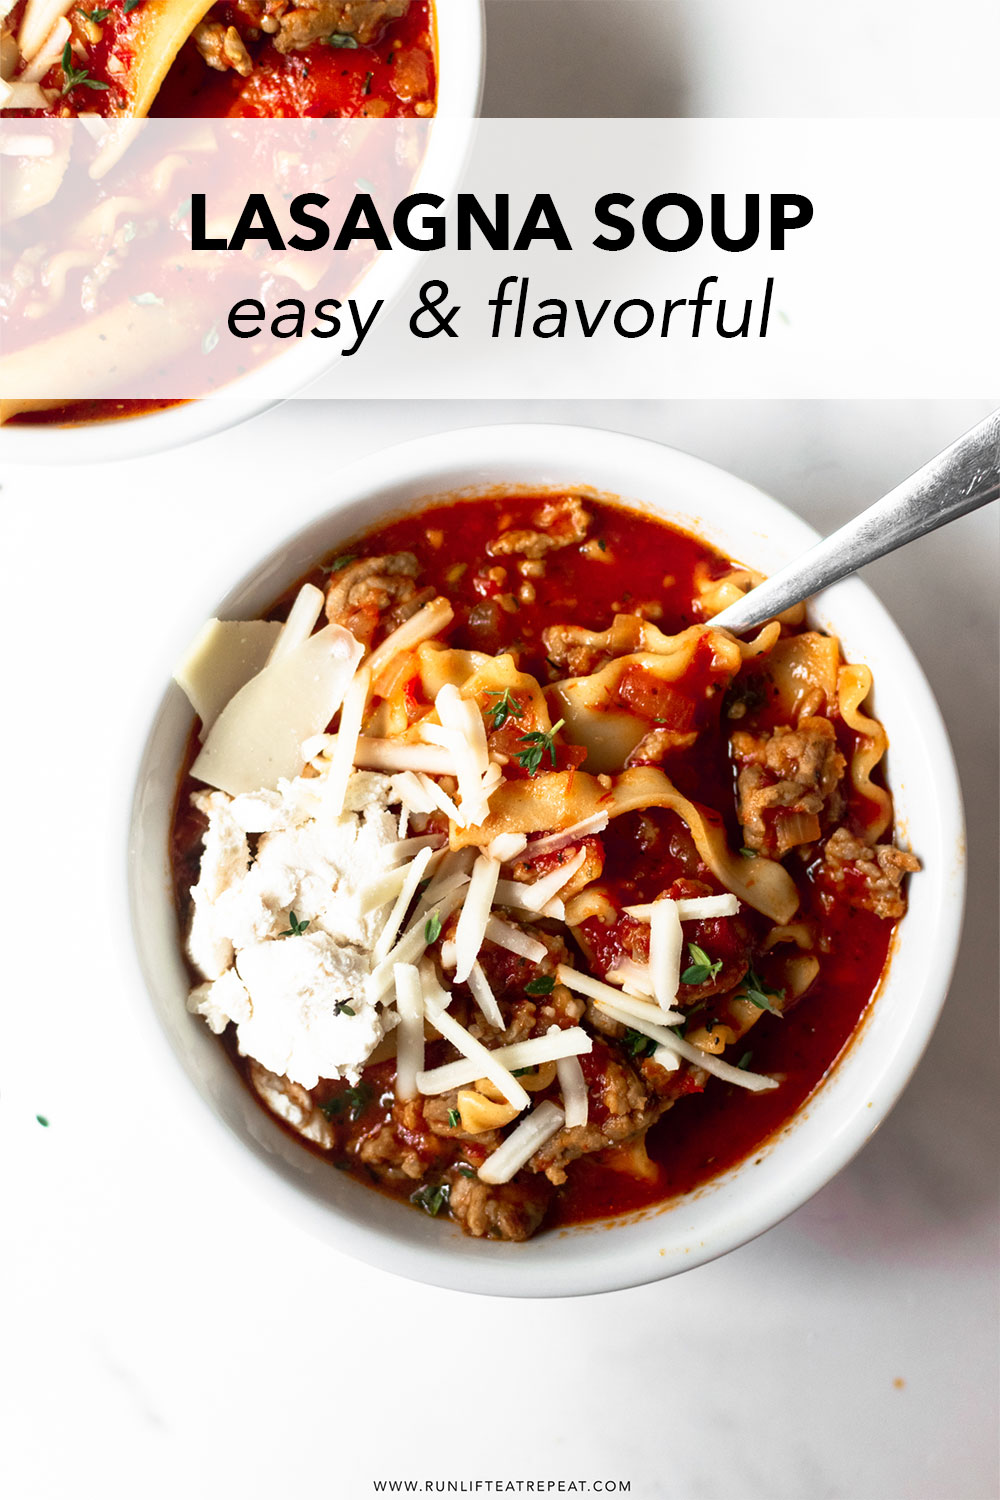 This lasagna soup recipe is easy, hearty, homemade, and satisfying. It's filled with Italian sausage, lasagna noodles and a ridiculously flavorful tomato broth. The soup is on the table in just 40 minutes and keeps perfectly for leftovers!